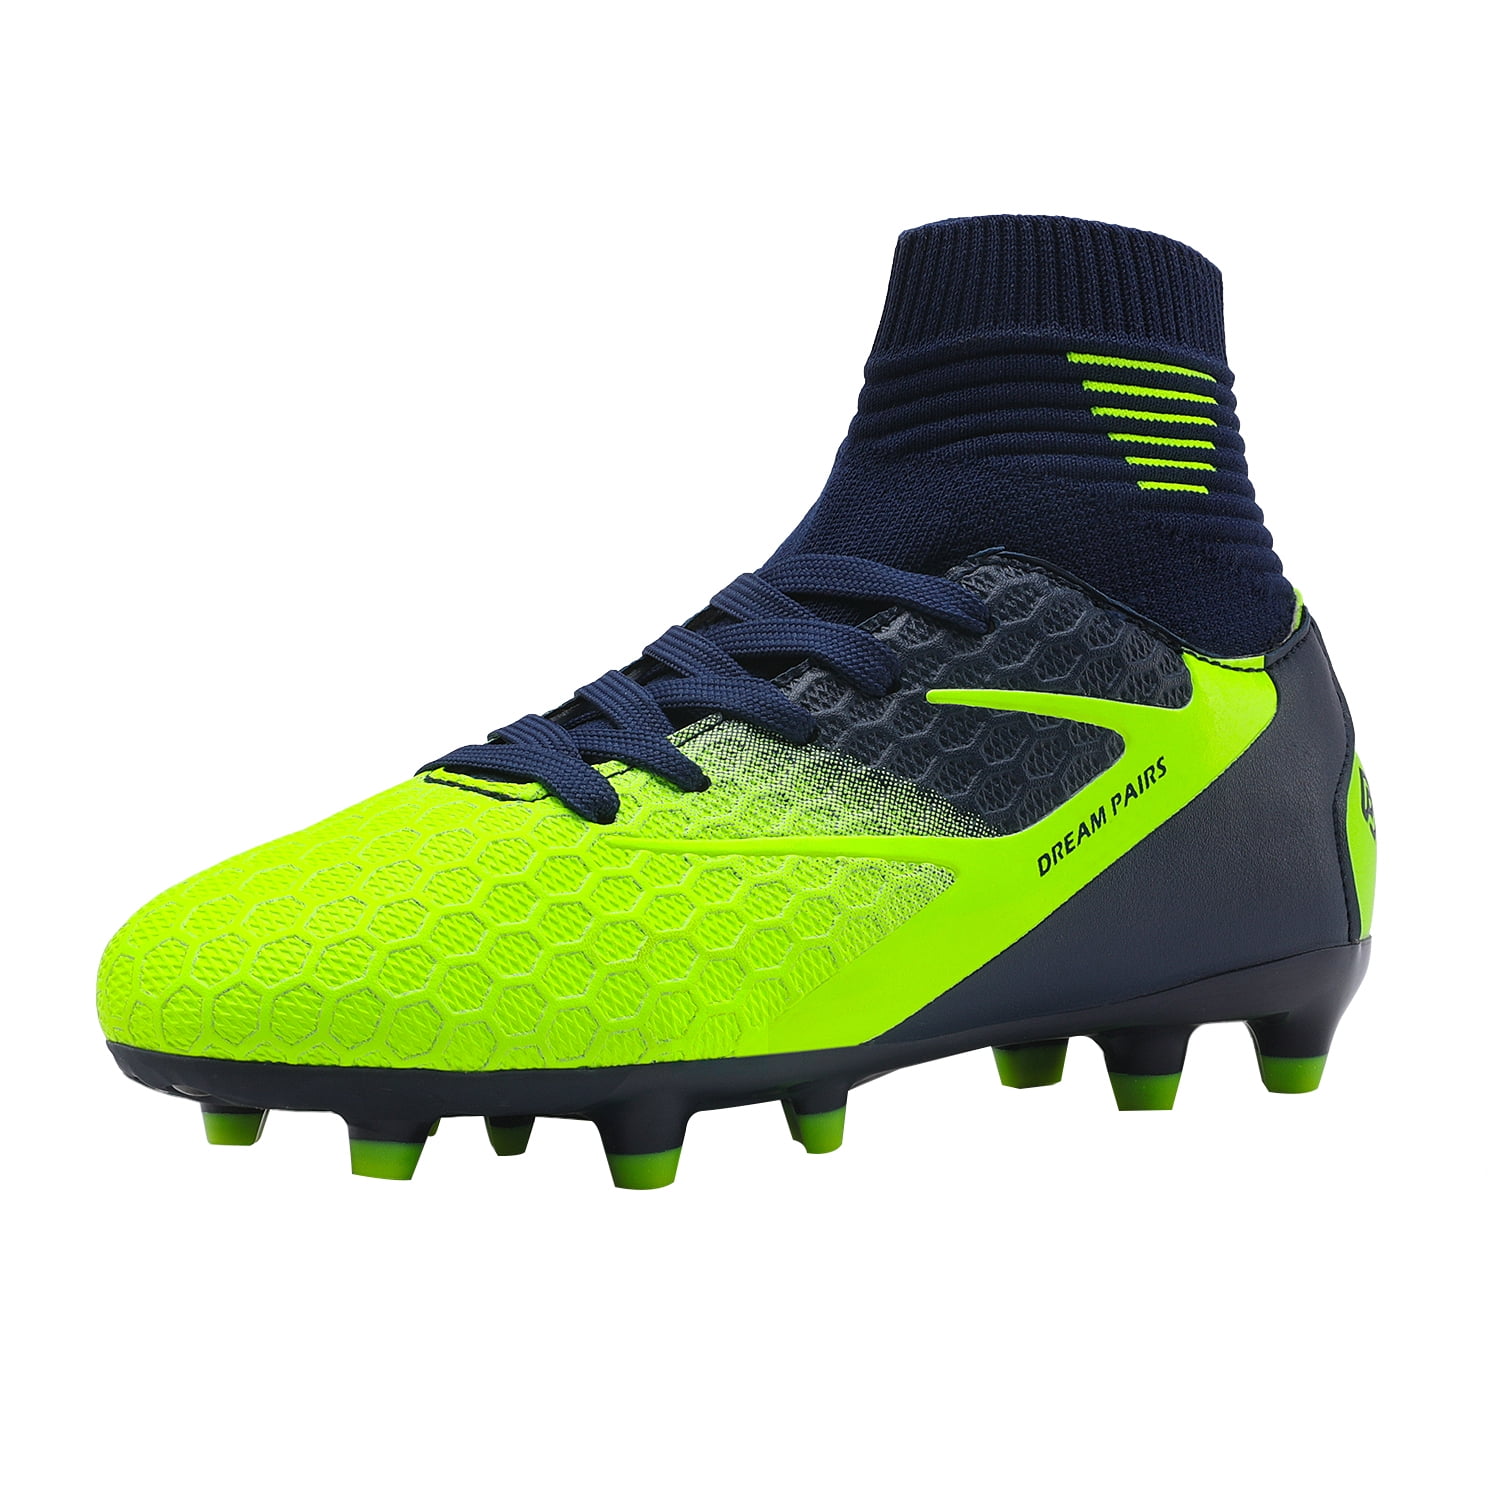 Little Kid/Big Kid T&B Kids Performance Soccer Cleats Shoes Low-Top Football Trainers Turf Firm Ground 